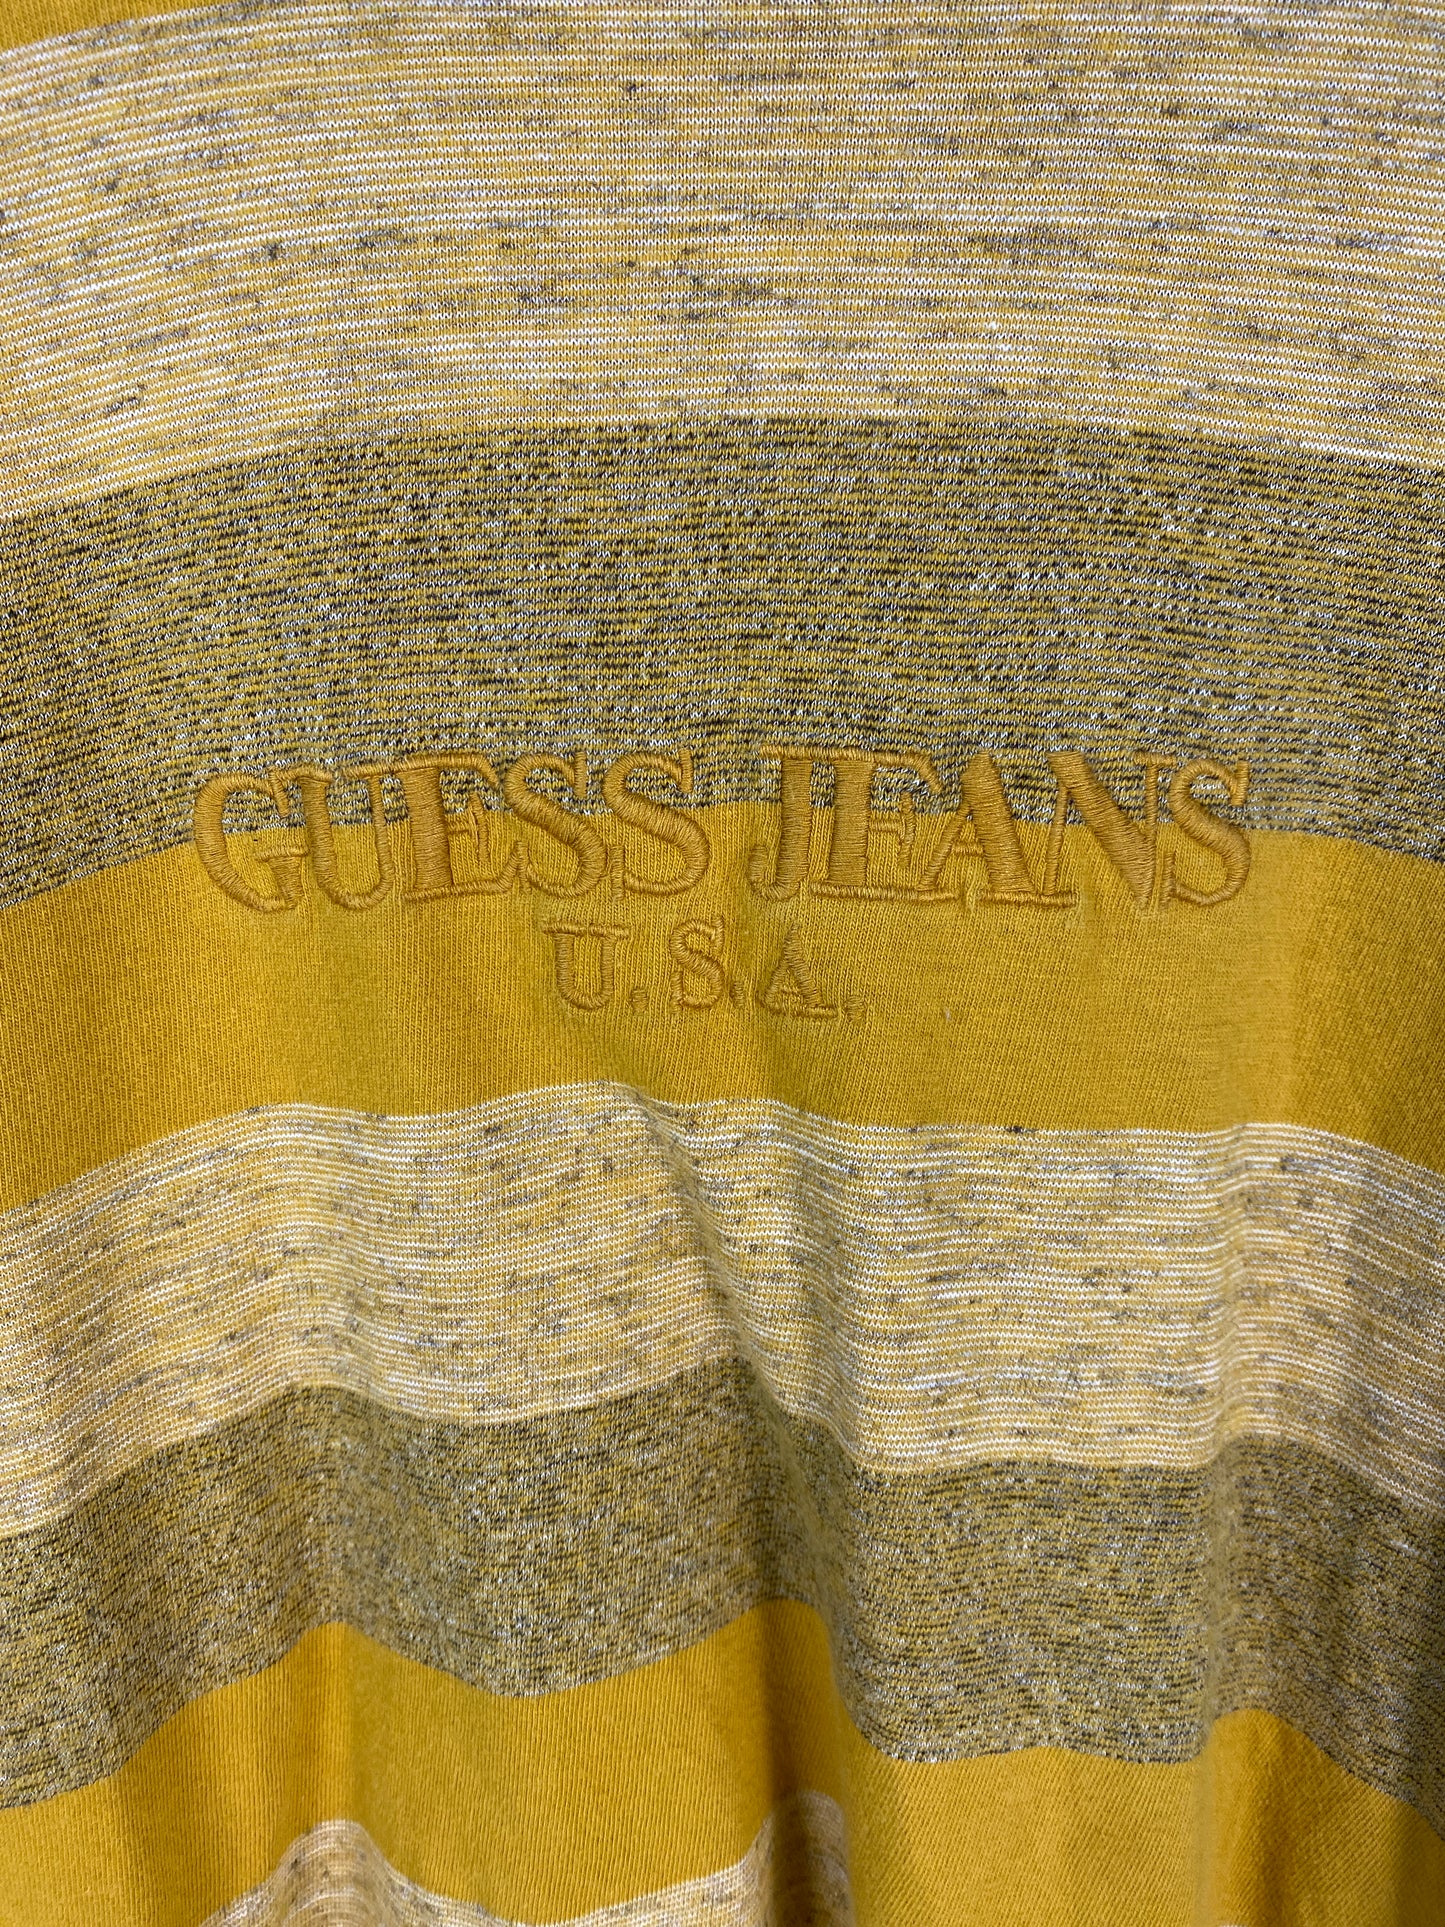 Vintage Guess Striped Autumn L/S Tee Fits Sm/ Med